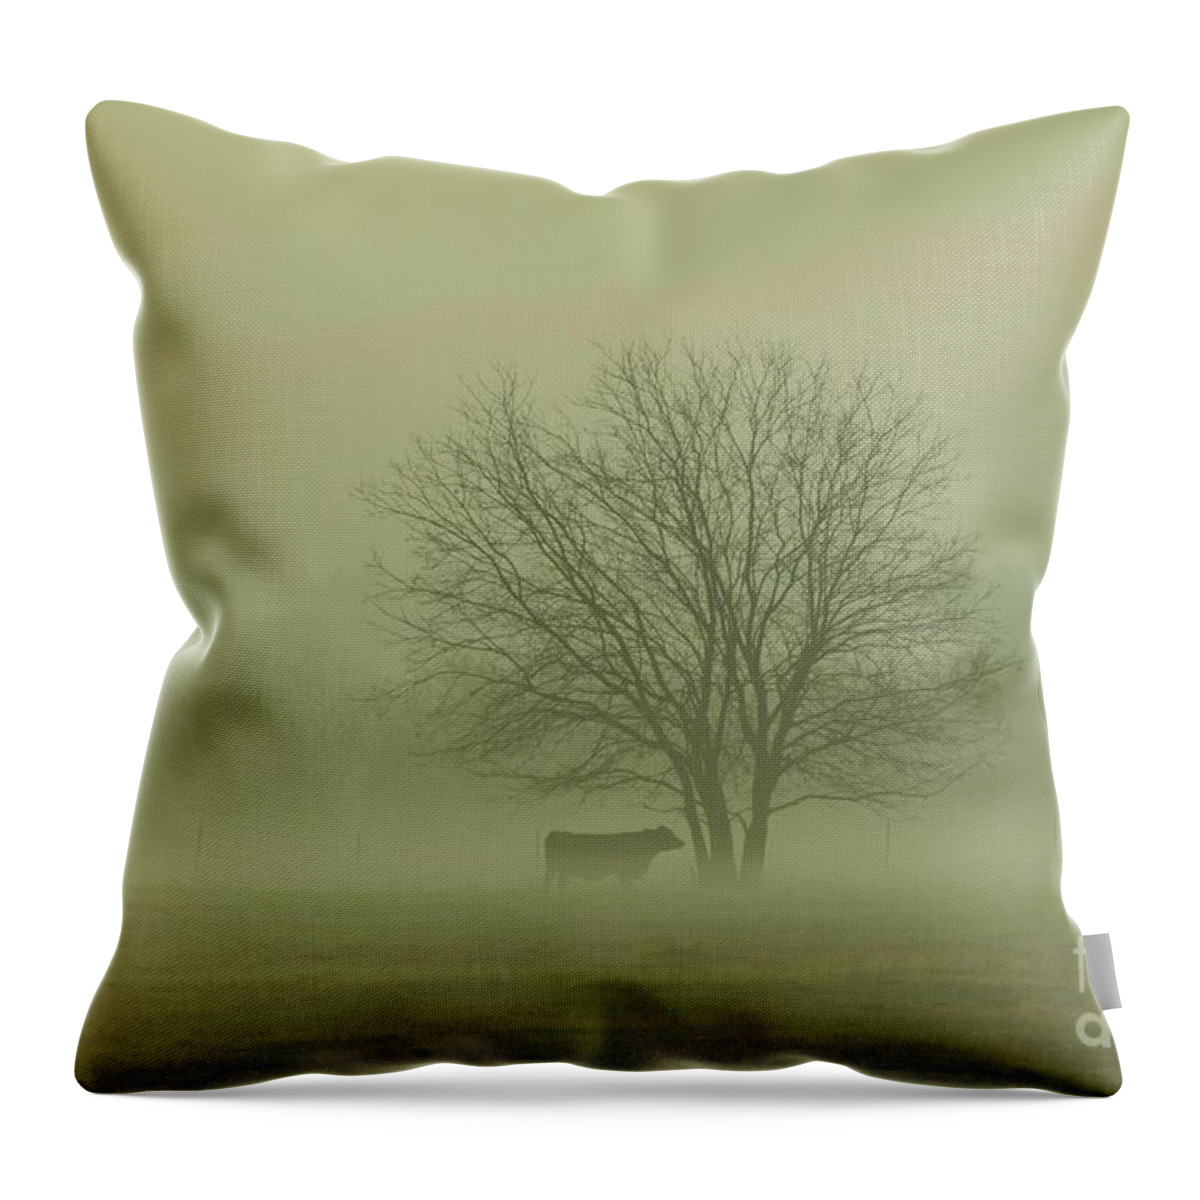 Morning Fog Throw Pillow featuring the photograph Early Morning Fog 009 by Robert ONeil